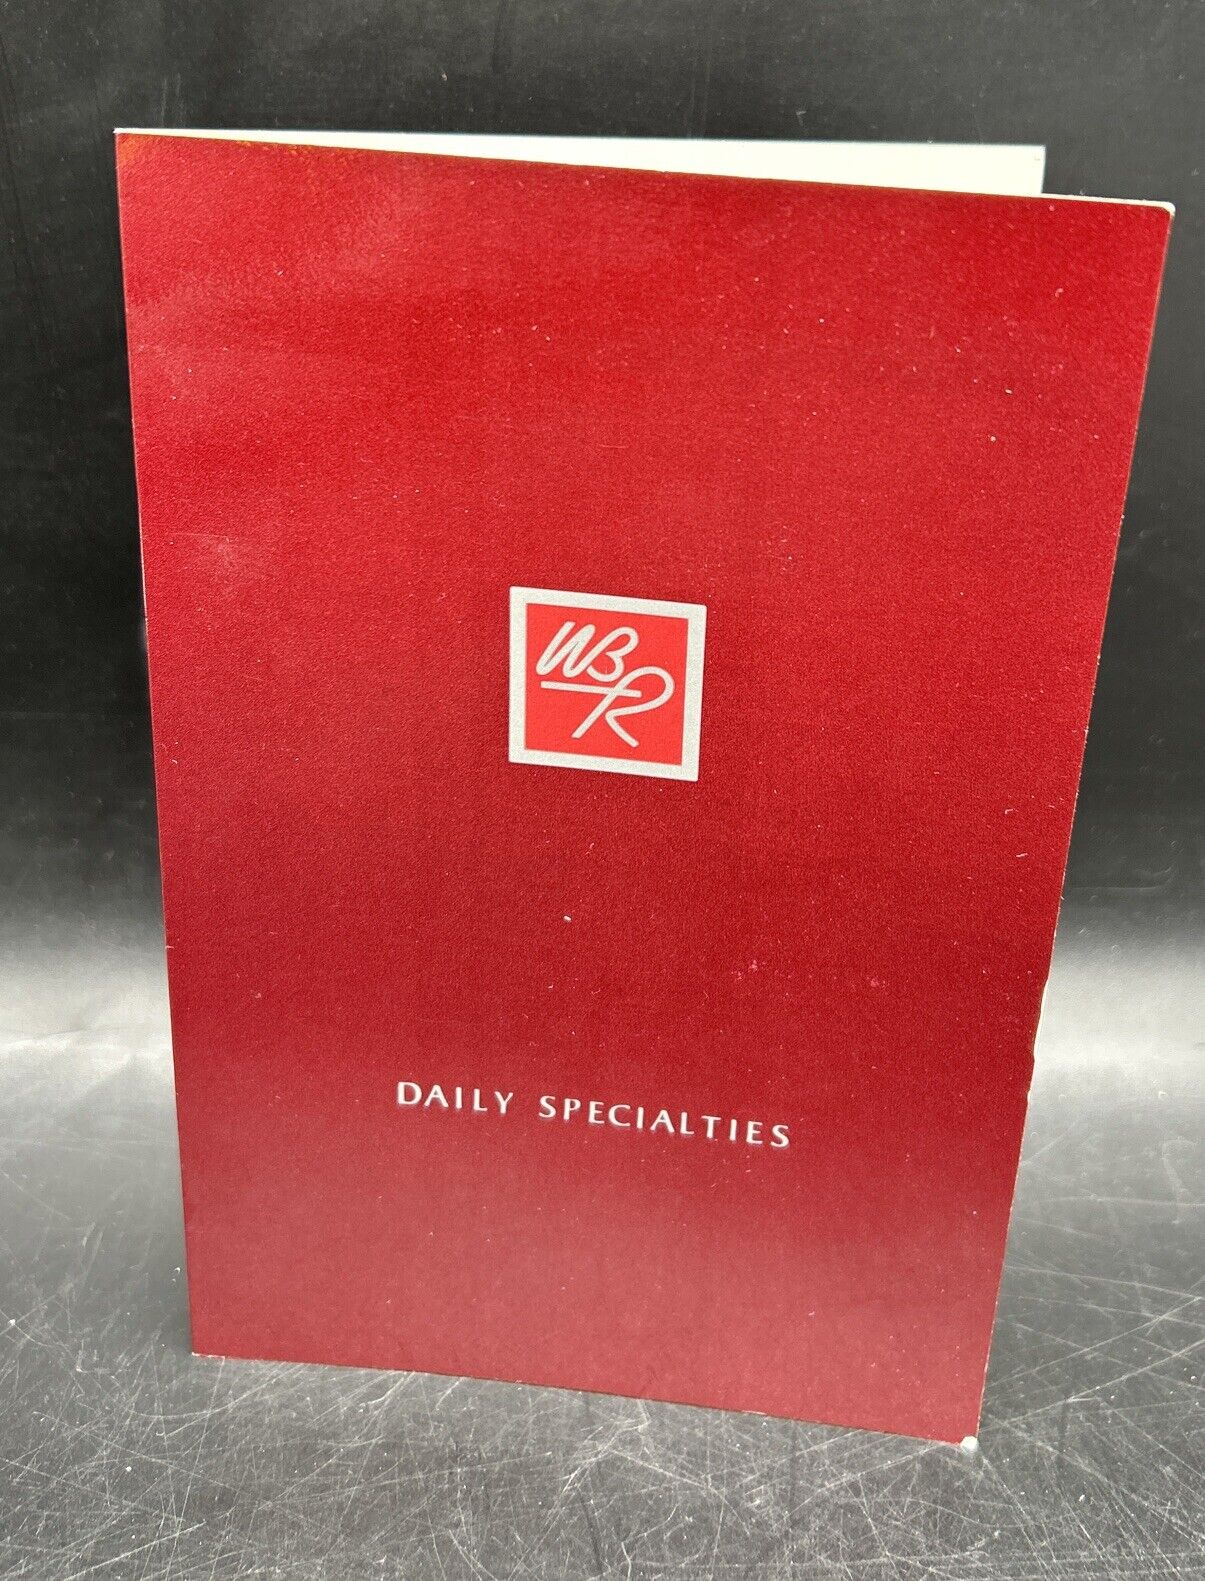 The Wrigley Building Restaurant Menu Collectible Great Condition